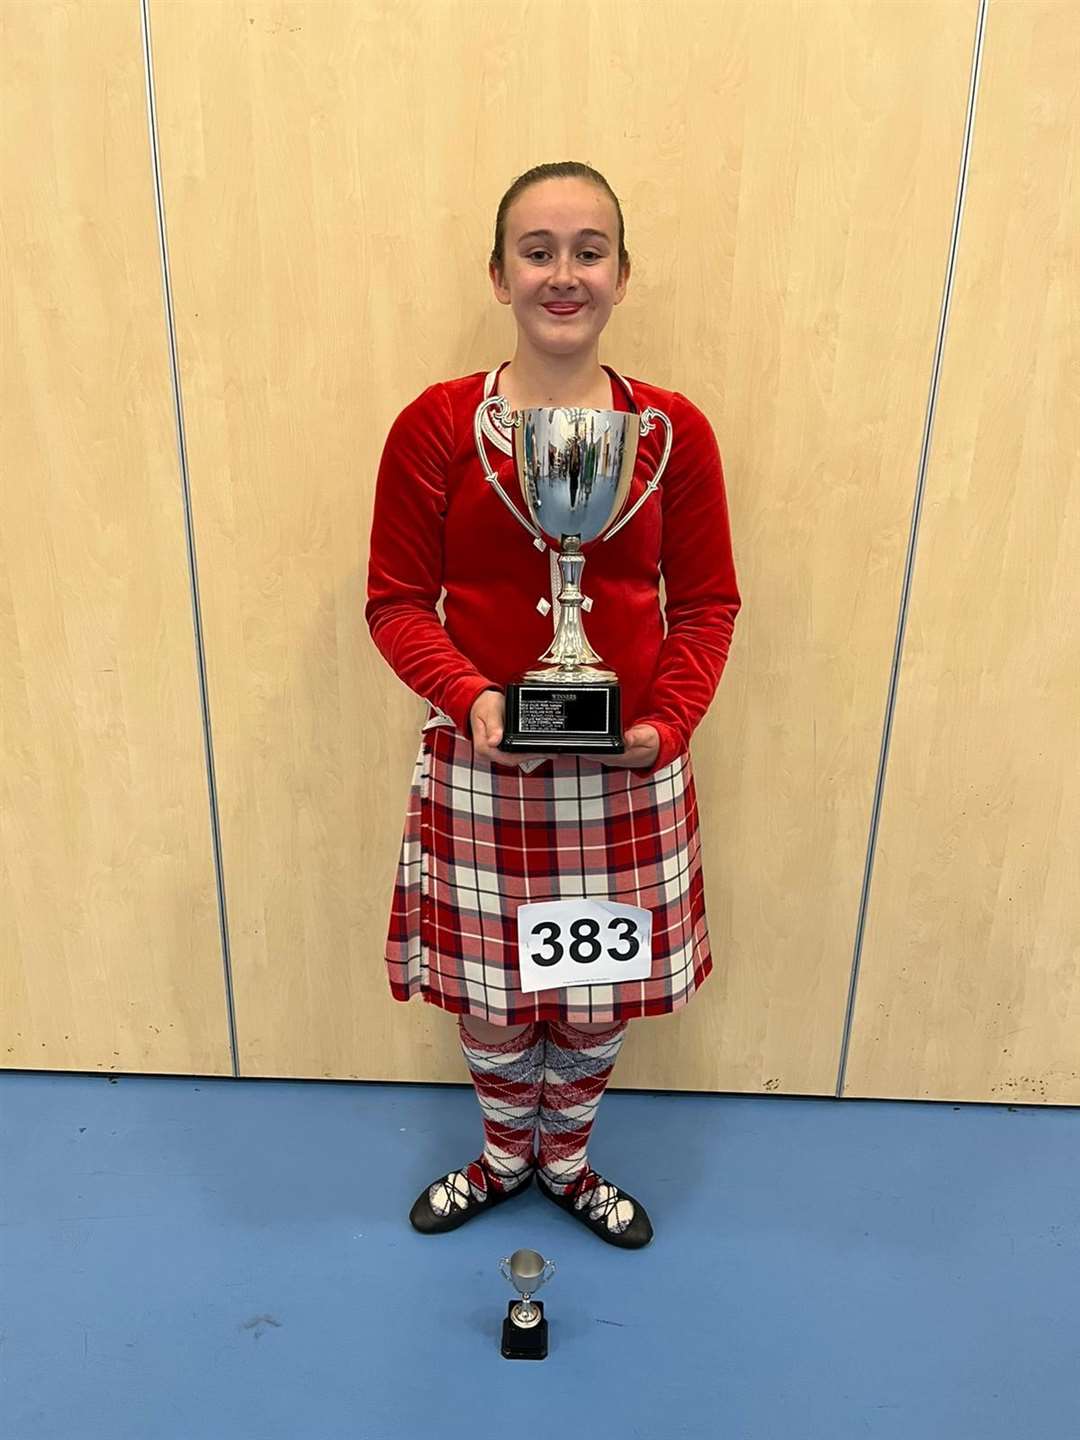 Champion dancer Niamh Yeoman from Tipperty